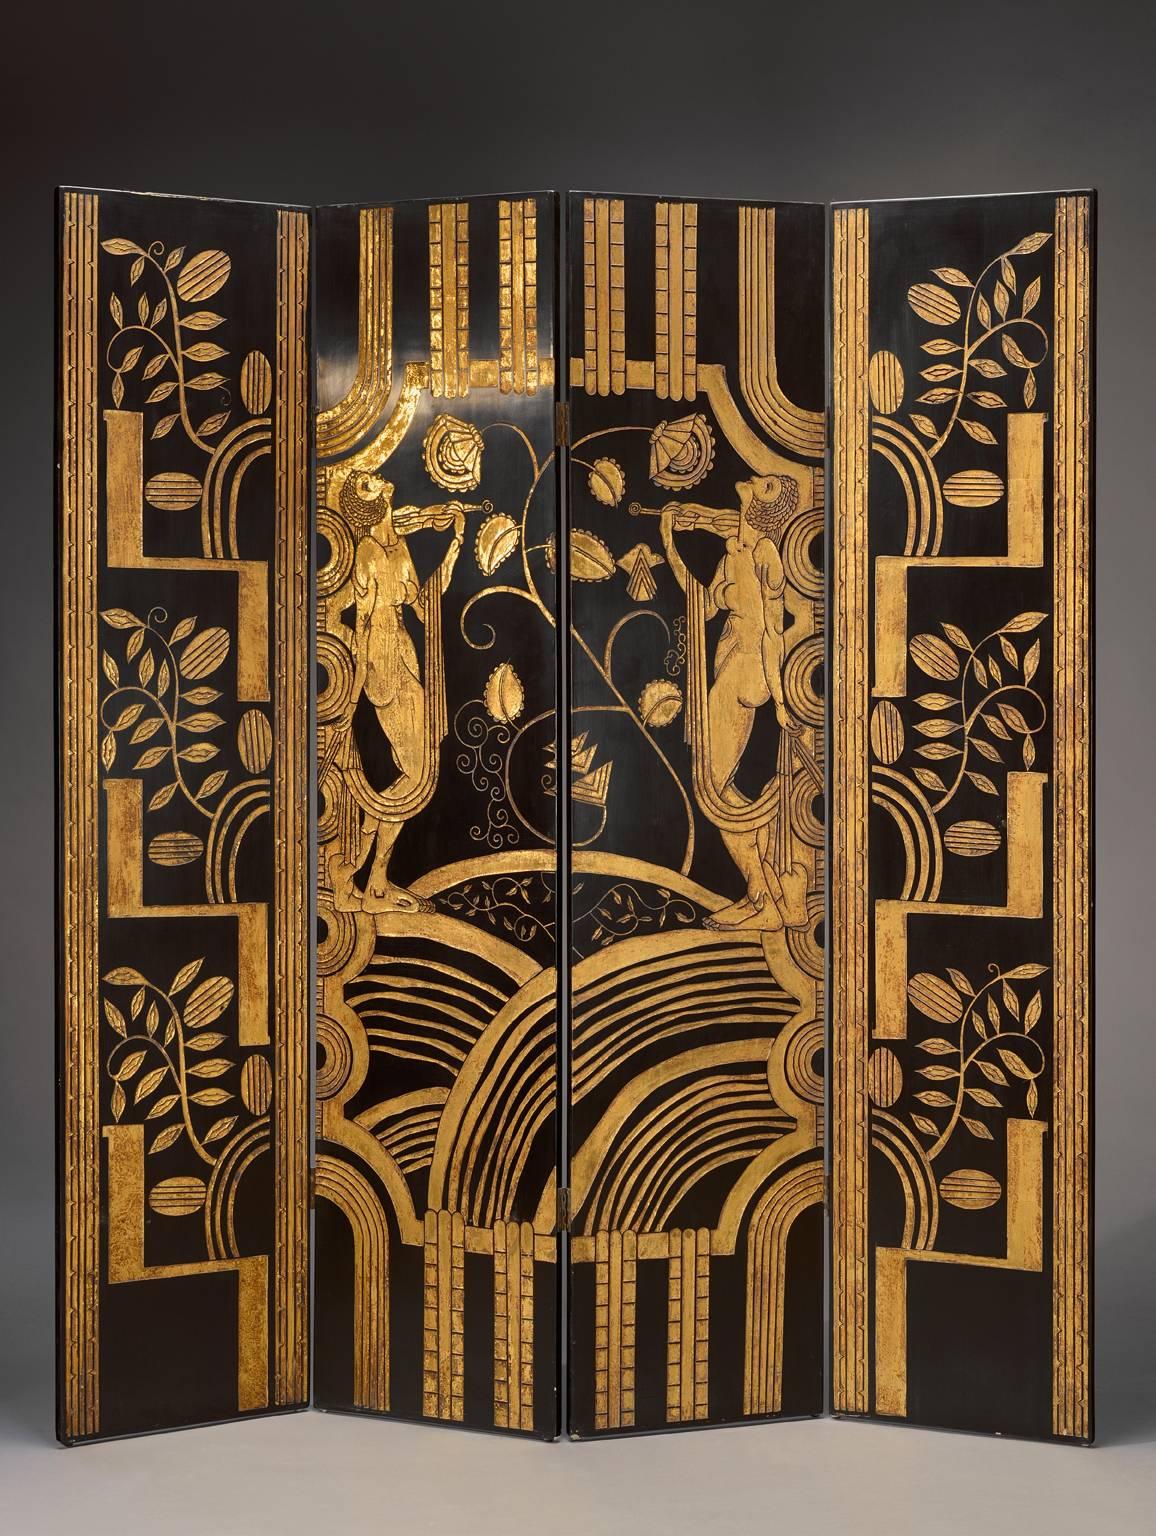 A very decorative 1925 French Art Deco black and gold lacquered screen with four joints panels decorated with musicians in an environment of plants on a gold background.